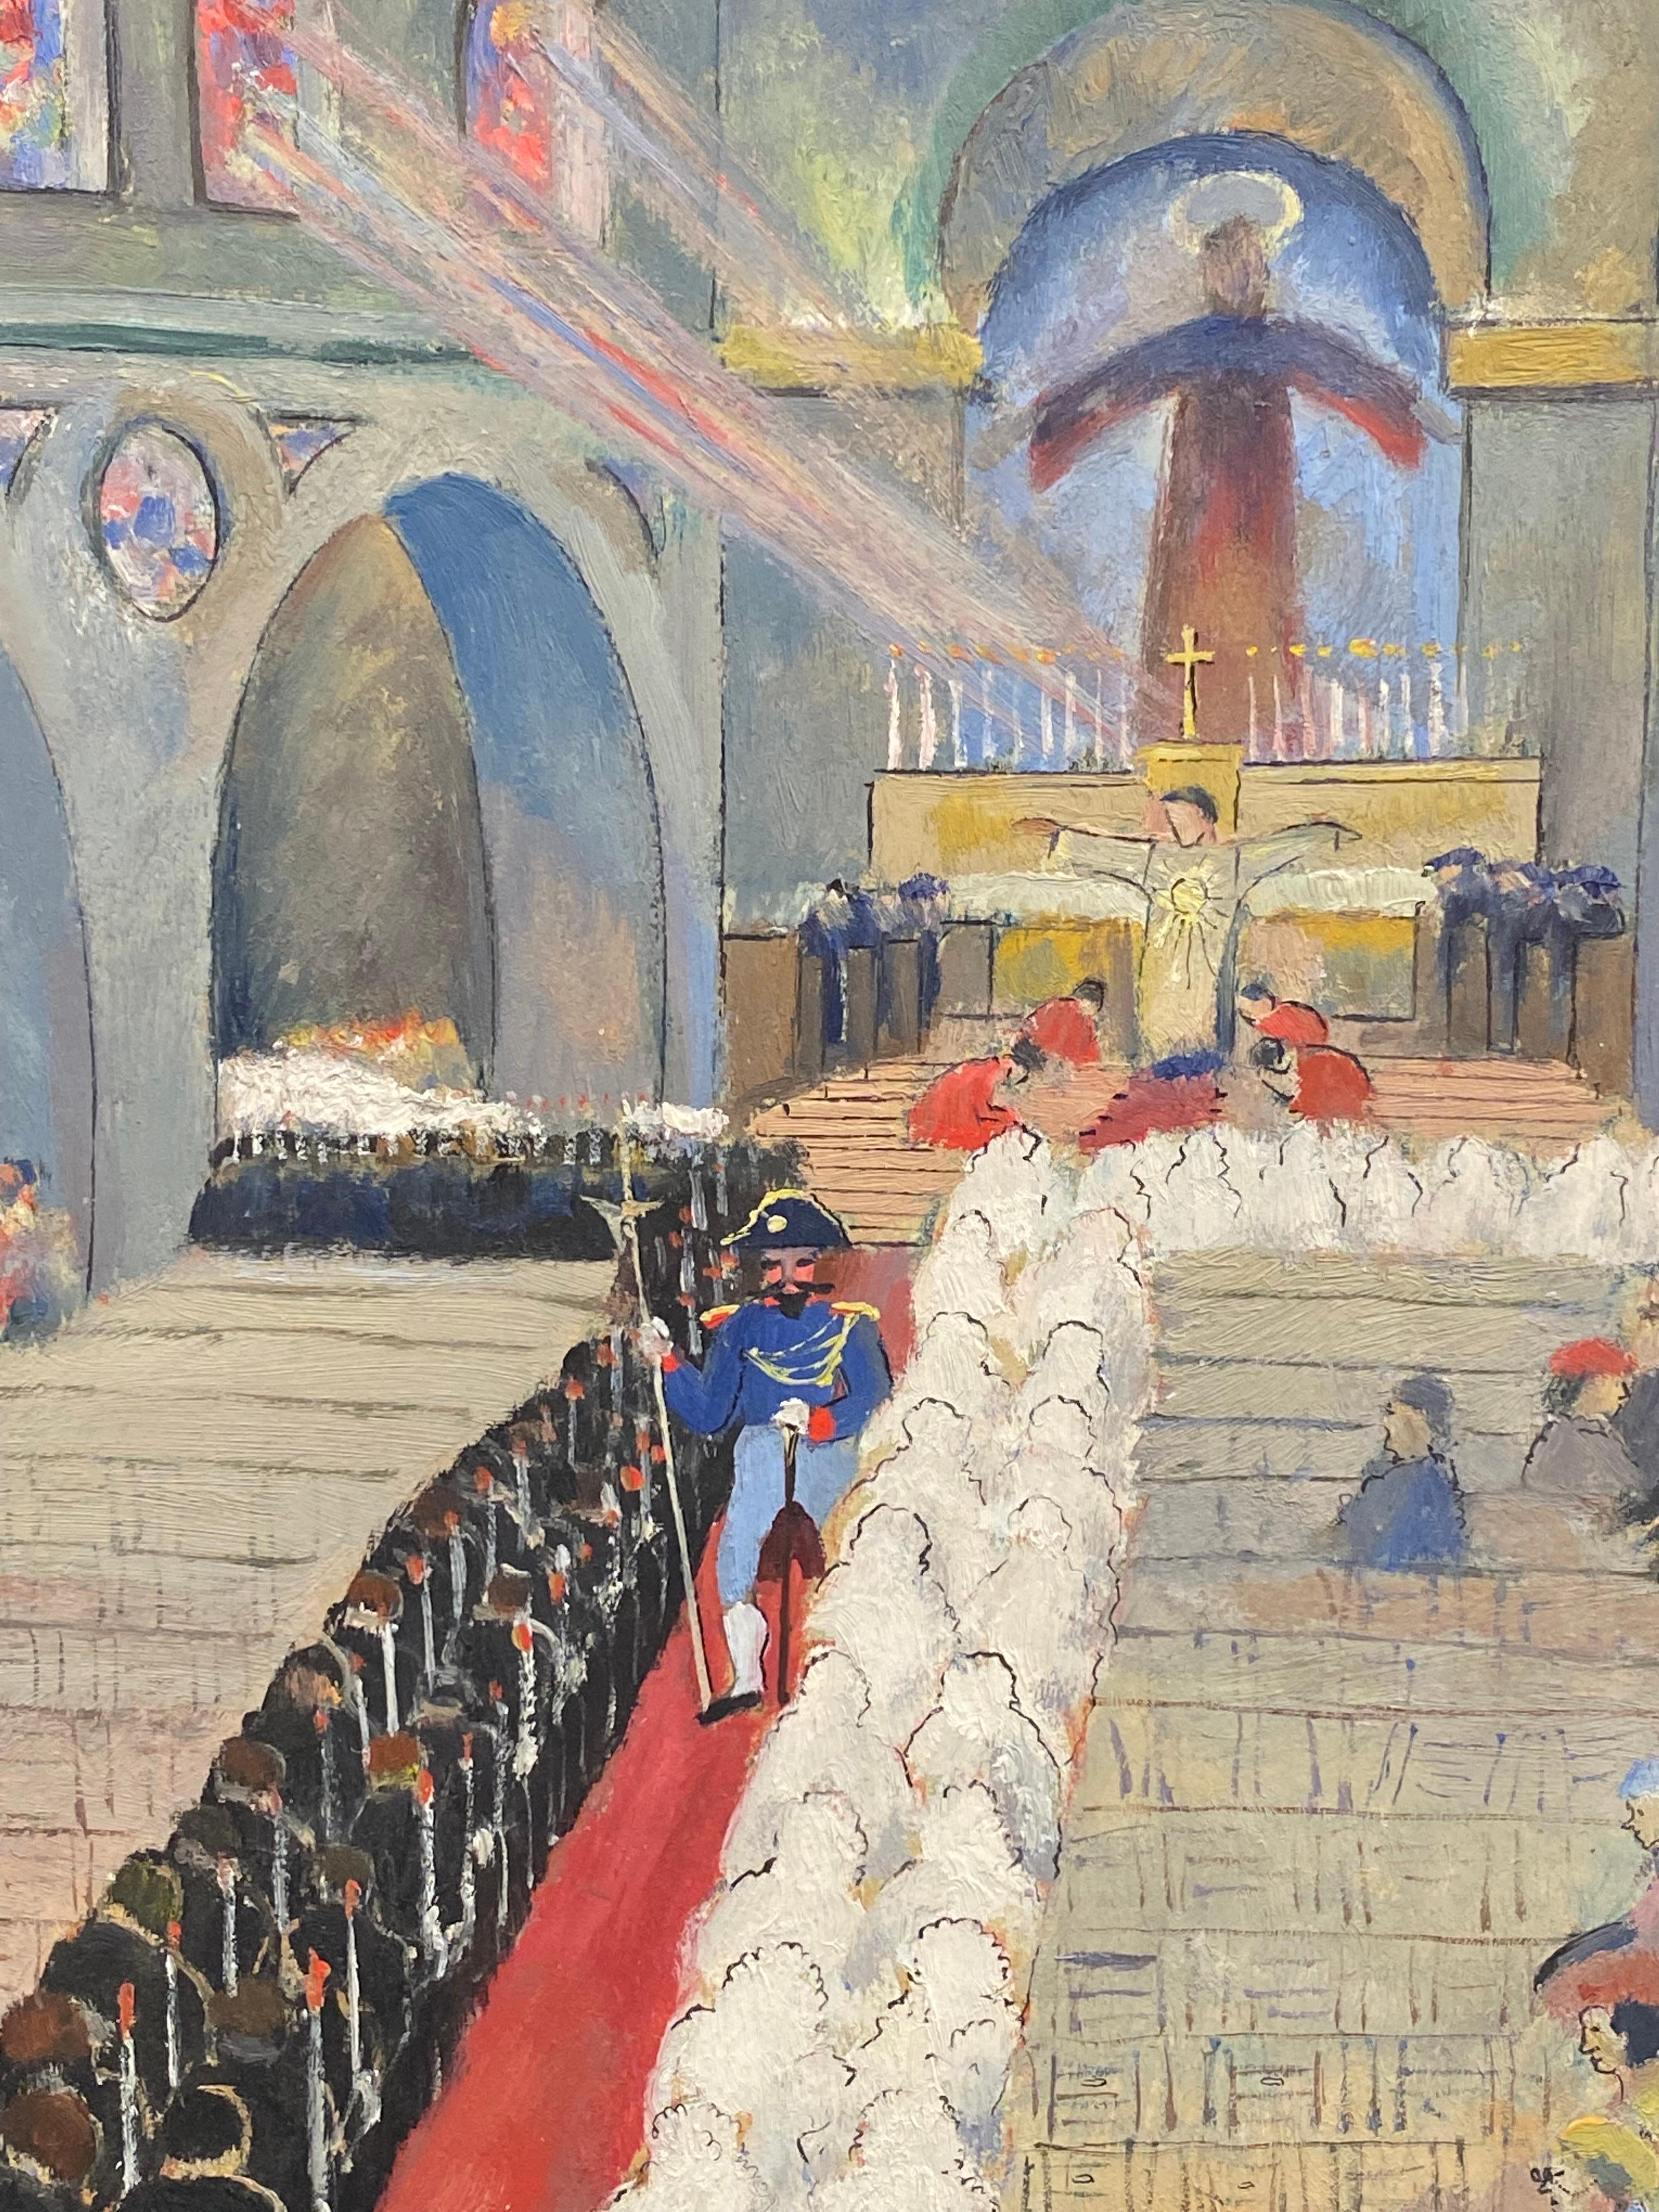 The First Communion 1930's French Modernist Oil Figures in Church Interior - Painting by Henri Therme